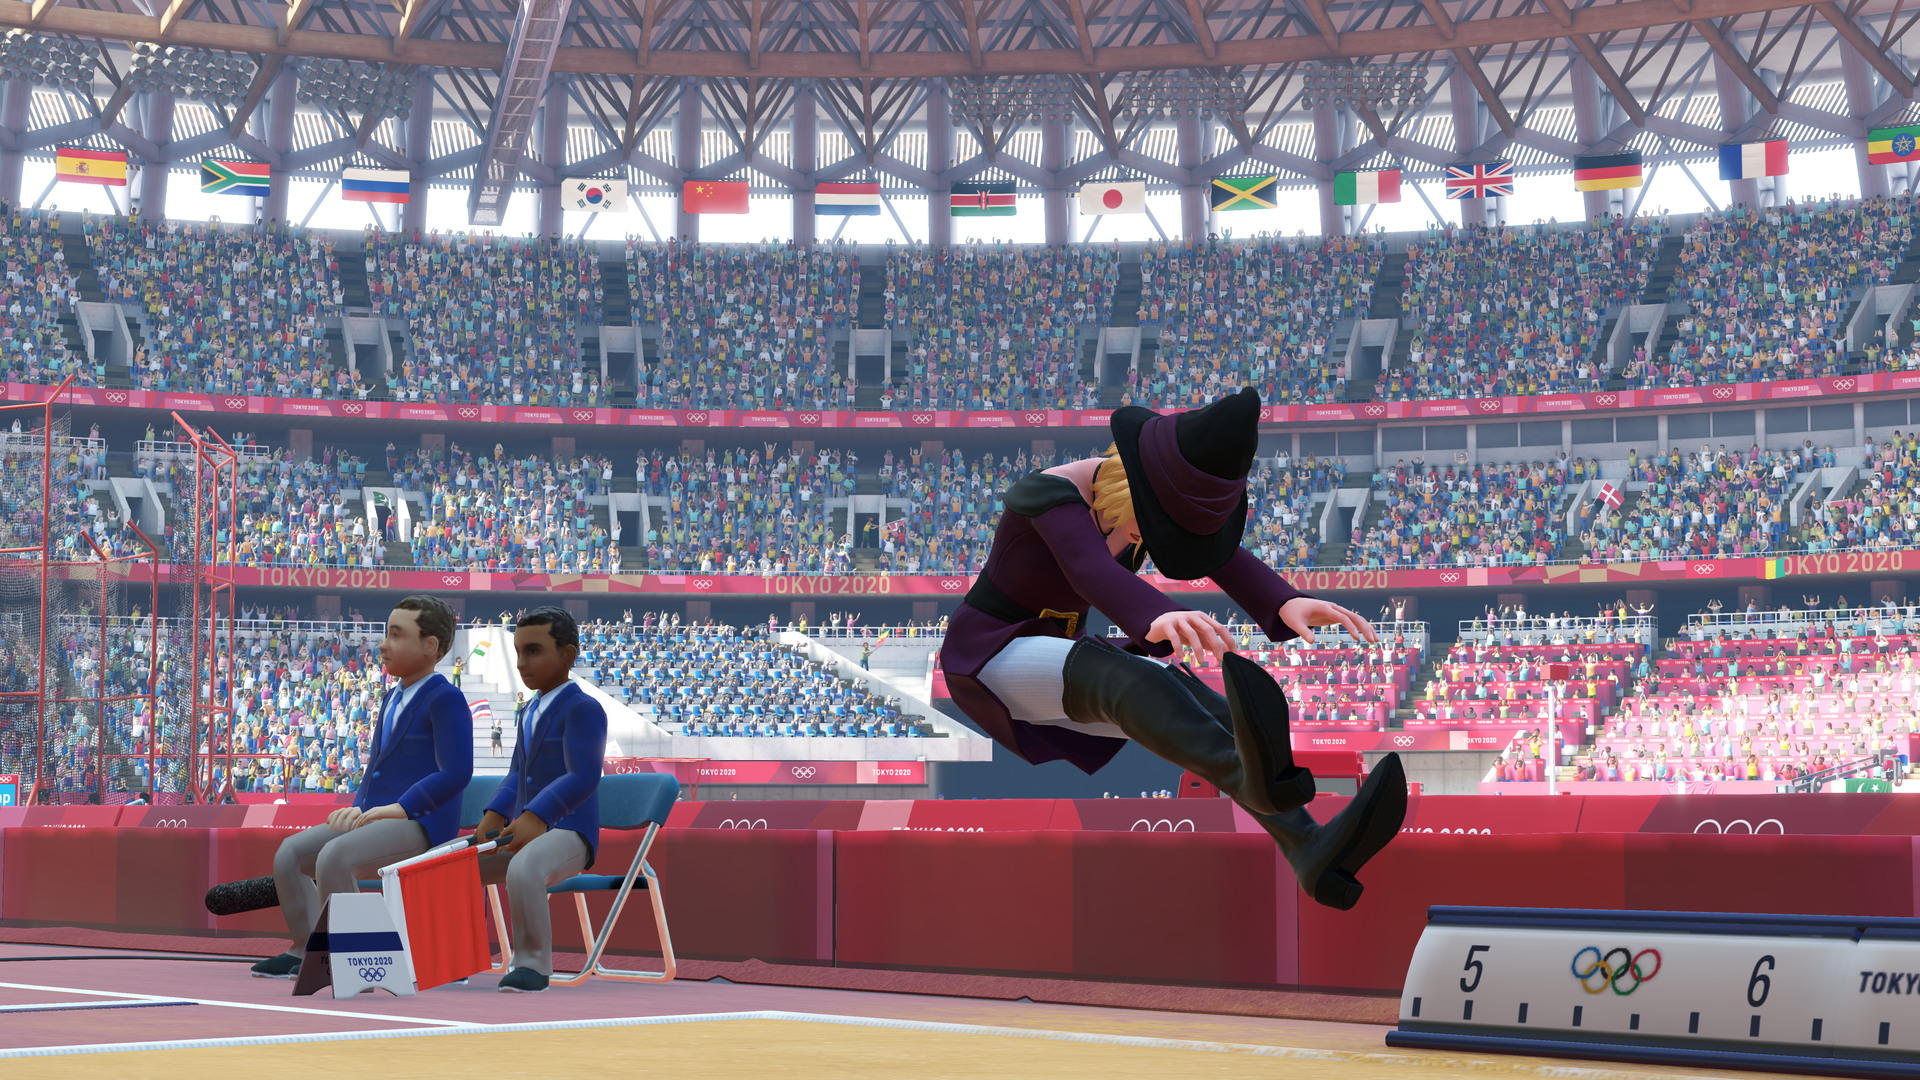 Olympic Games Tokyo 2020 - The Official Video Game - screenshot 10